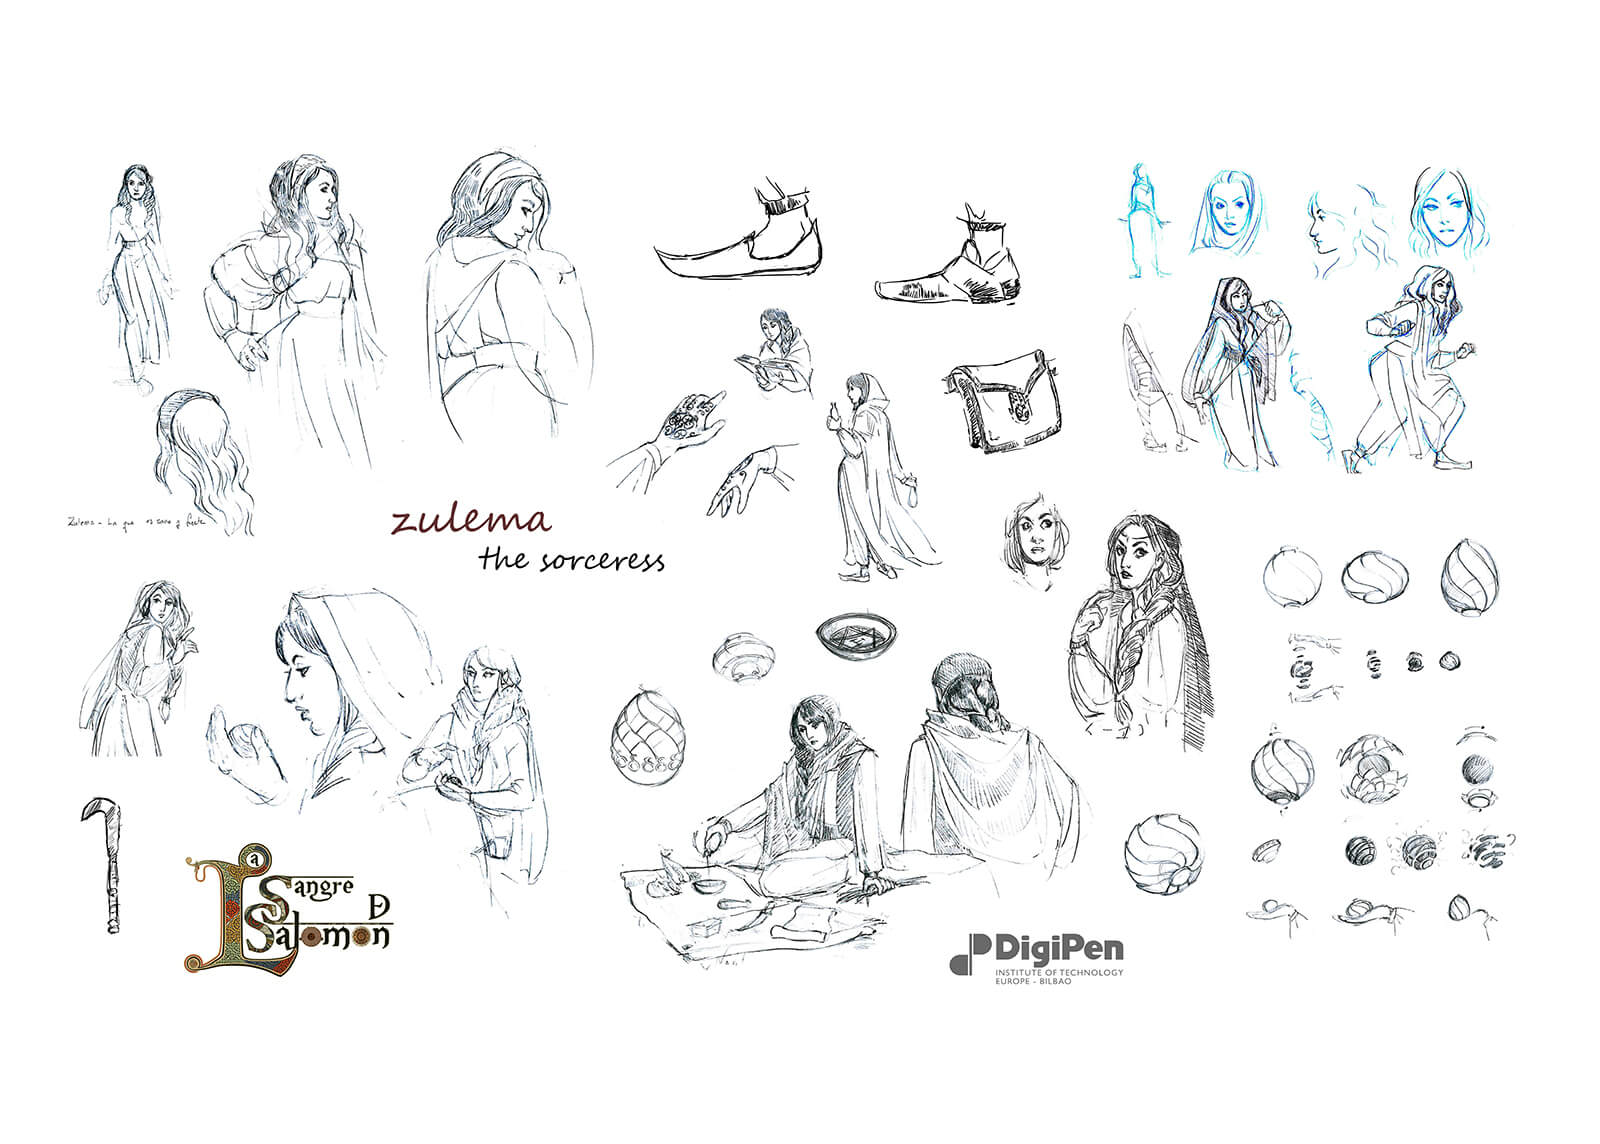 Concept drawings of Zulema The Sorceress from La Sangre de Salomon